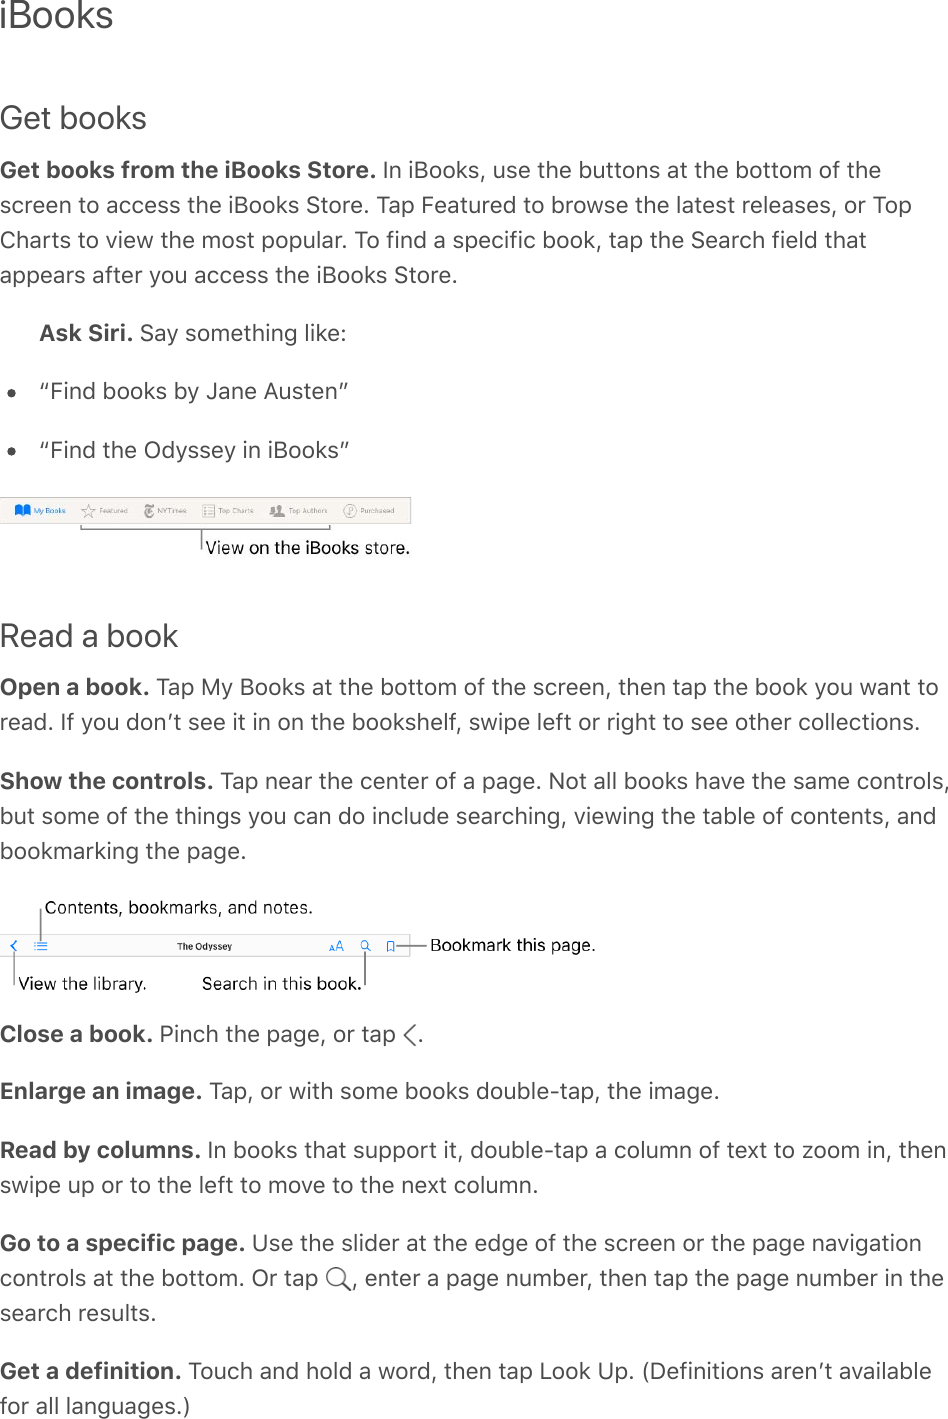 iBooksGet booksGet books from the iBooks Store. In iBooks, use the buttons at the bottom of thescreen to access the iBooks Store. Tap Featured to browse the latest releases, or TopCharts to view the most popular. To find a specific book, tap the Search field thatappears after you access the iBooks Store.Ask Siri. Say something like:“Find books by Jane Austen”“Find the Odyssey in iBooks”Read a bookOpen a book. Tap My Books at the bottom of the screen, then tap the book you want toread. If you donʼt see it in on the bookshelf, swipe left or right to see other collections.Show the controls. Tap near the center of a page. Not all books have the same controls,but some of the things you can do include searching, viewing the table of contents, andbookmarking the page.Close a book. Pinch the page, or tap  .Enlarge an image. Tap, or with some books double-tap, the image.Read by columns. In books that support it, double-tap a column of text to zoom in, thenswipe up or to the left to move to the next column.Go to a specific page. Use the slider at the edge of the screen or the page navigationcontrols at the bottom. Or tap  , enter a page number, then tap the page number in thesearch results.Get a definition. Touch and hold a word, then tap Look Up. (Definitions arenʼt availablefor all languages.)